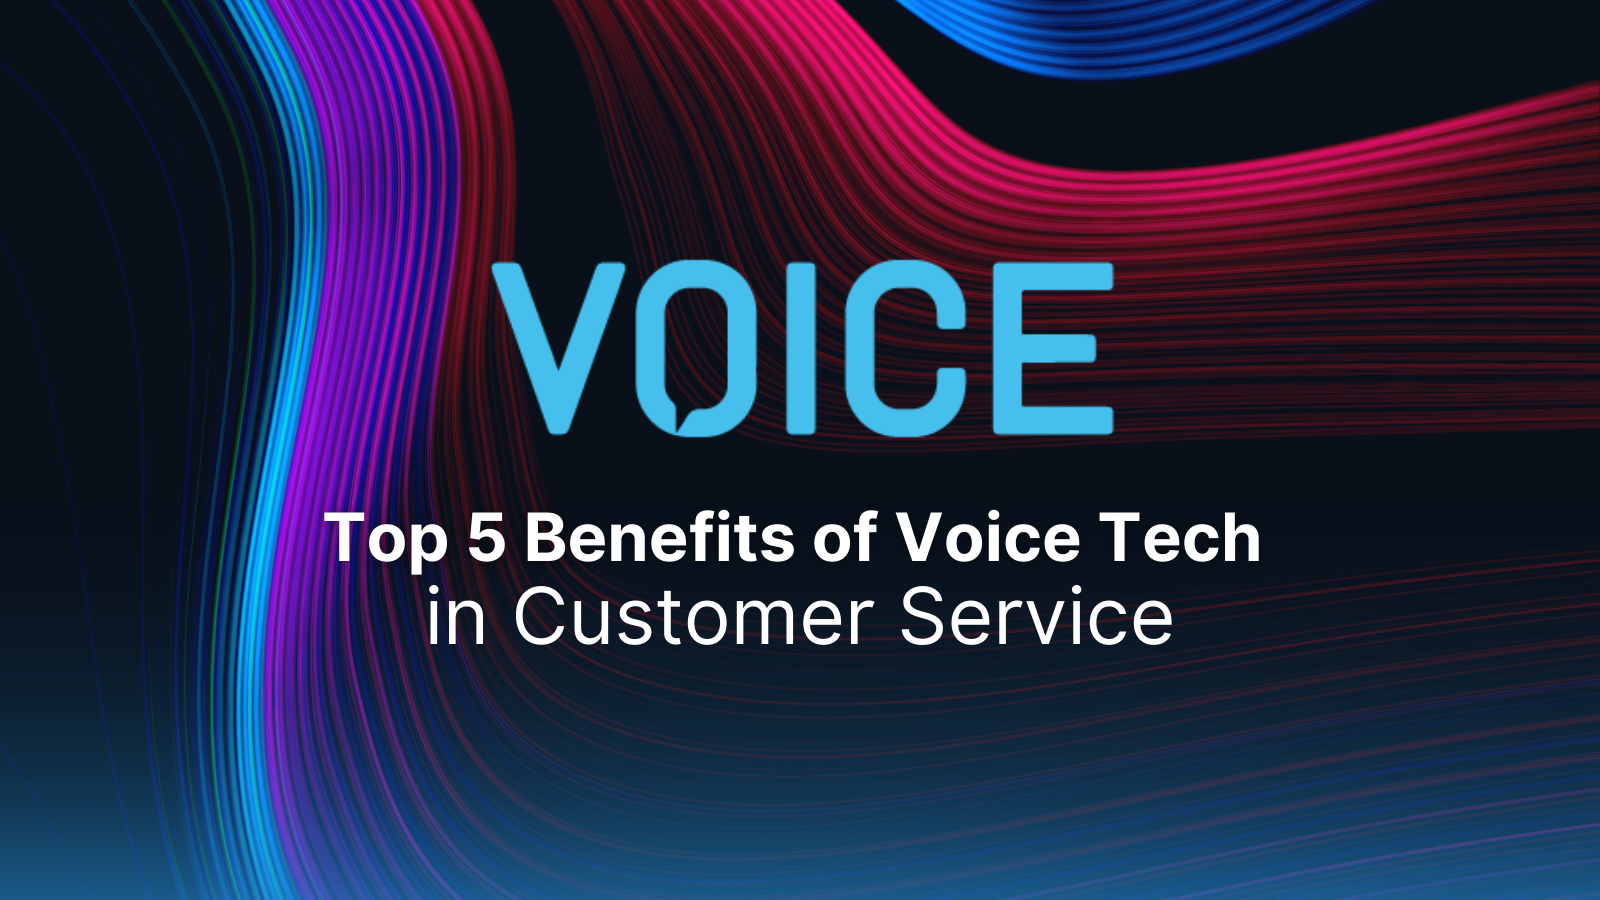 Top 5 Benefits of Voice Tech in Customer Service